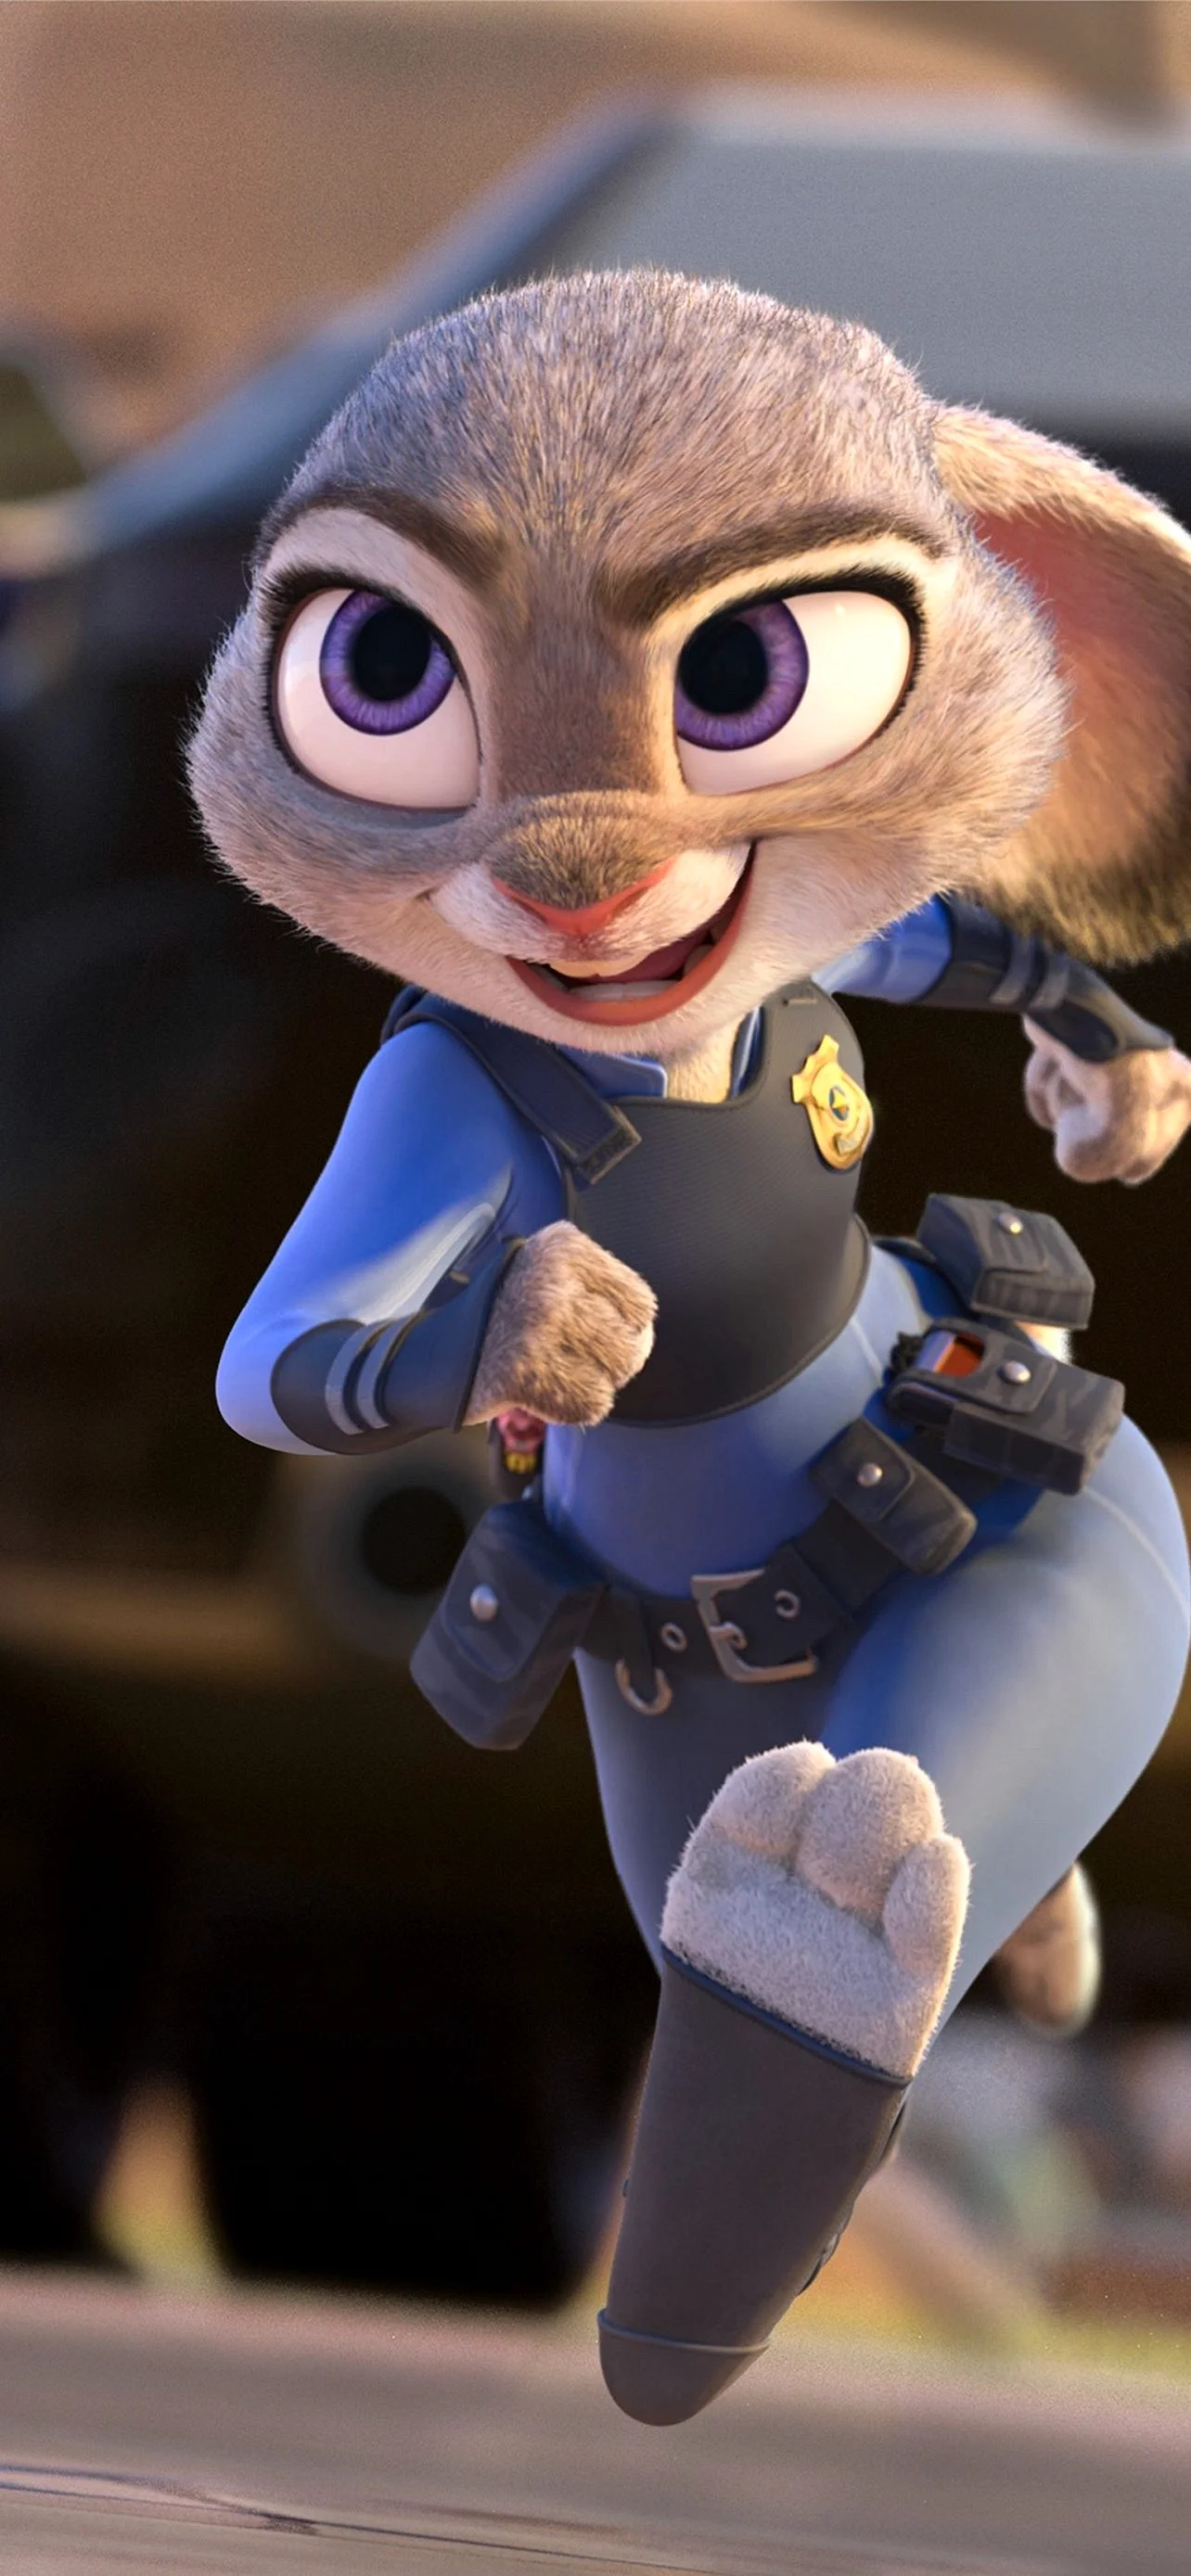 Judy Hopps Wallpaper for iPhone 12 Pro Max